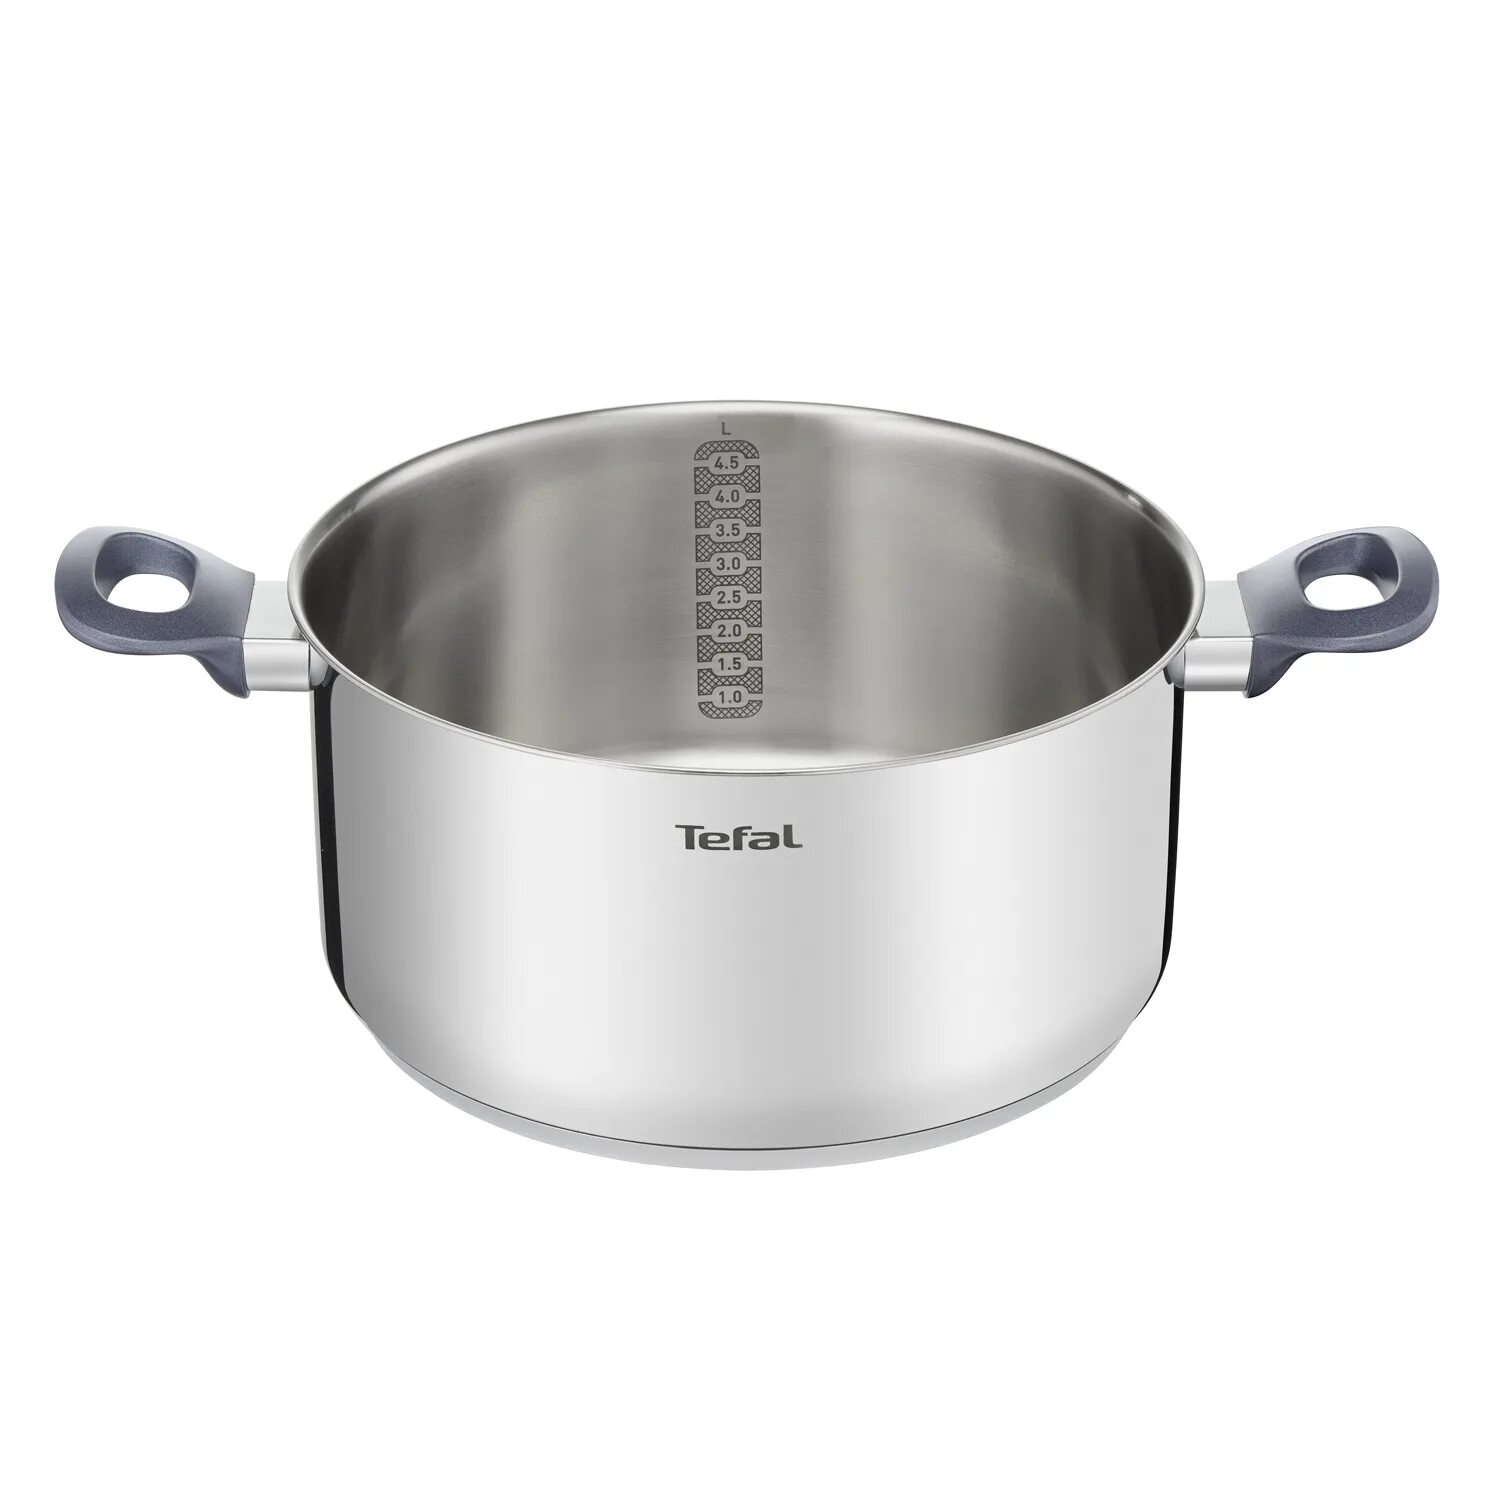 Tefal daily cook. Tefal g7124614 Daily Cook. Кастрюля Tefal Daily Cook g7124414 серебристый. Ковш Tefal Pro Cook g6052374. Tefal Pro Cook 24 сотейник.